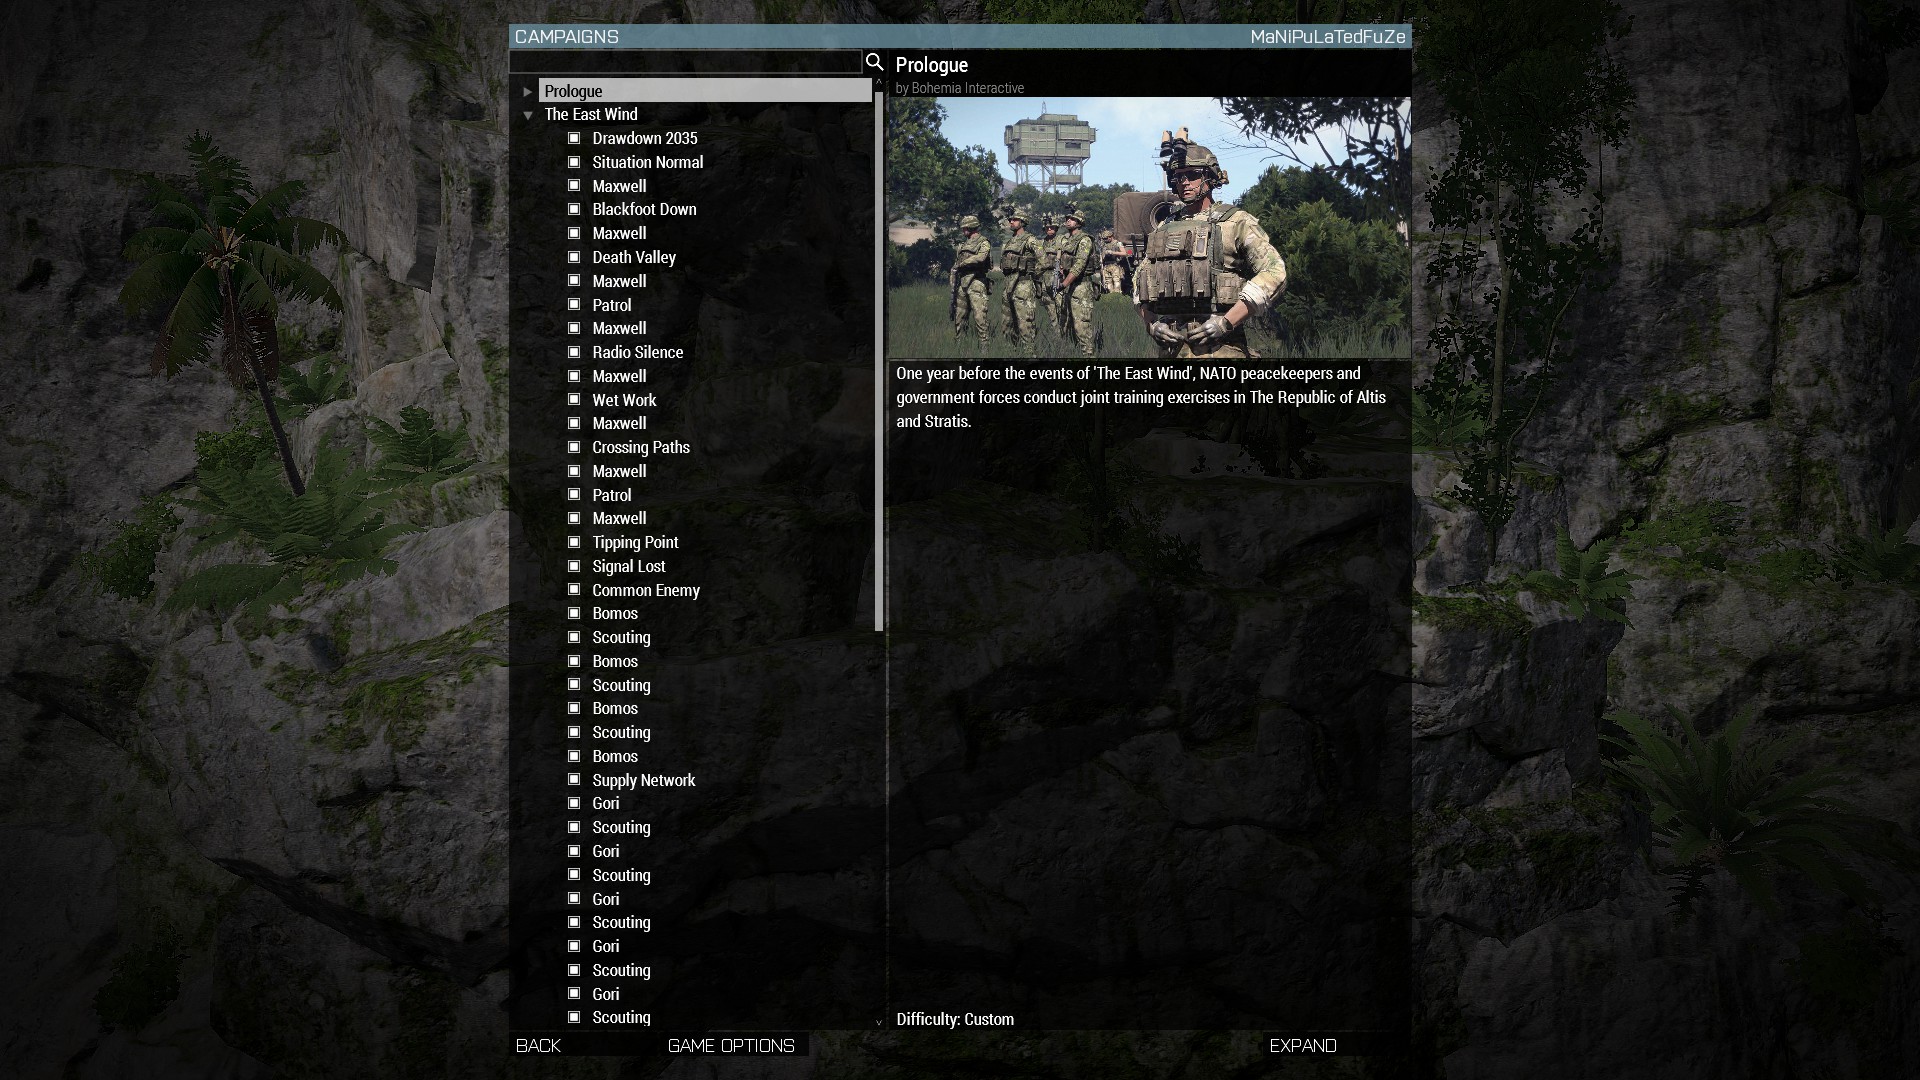 T Arma 3 Single Player Campaigns Lists Duplicate Campaigns